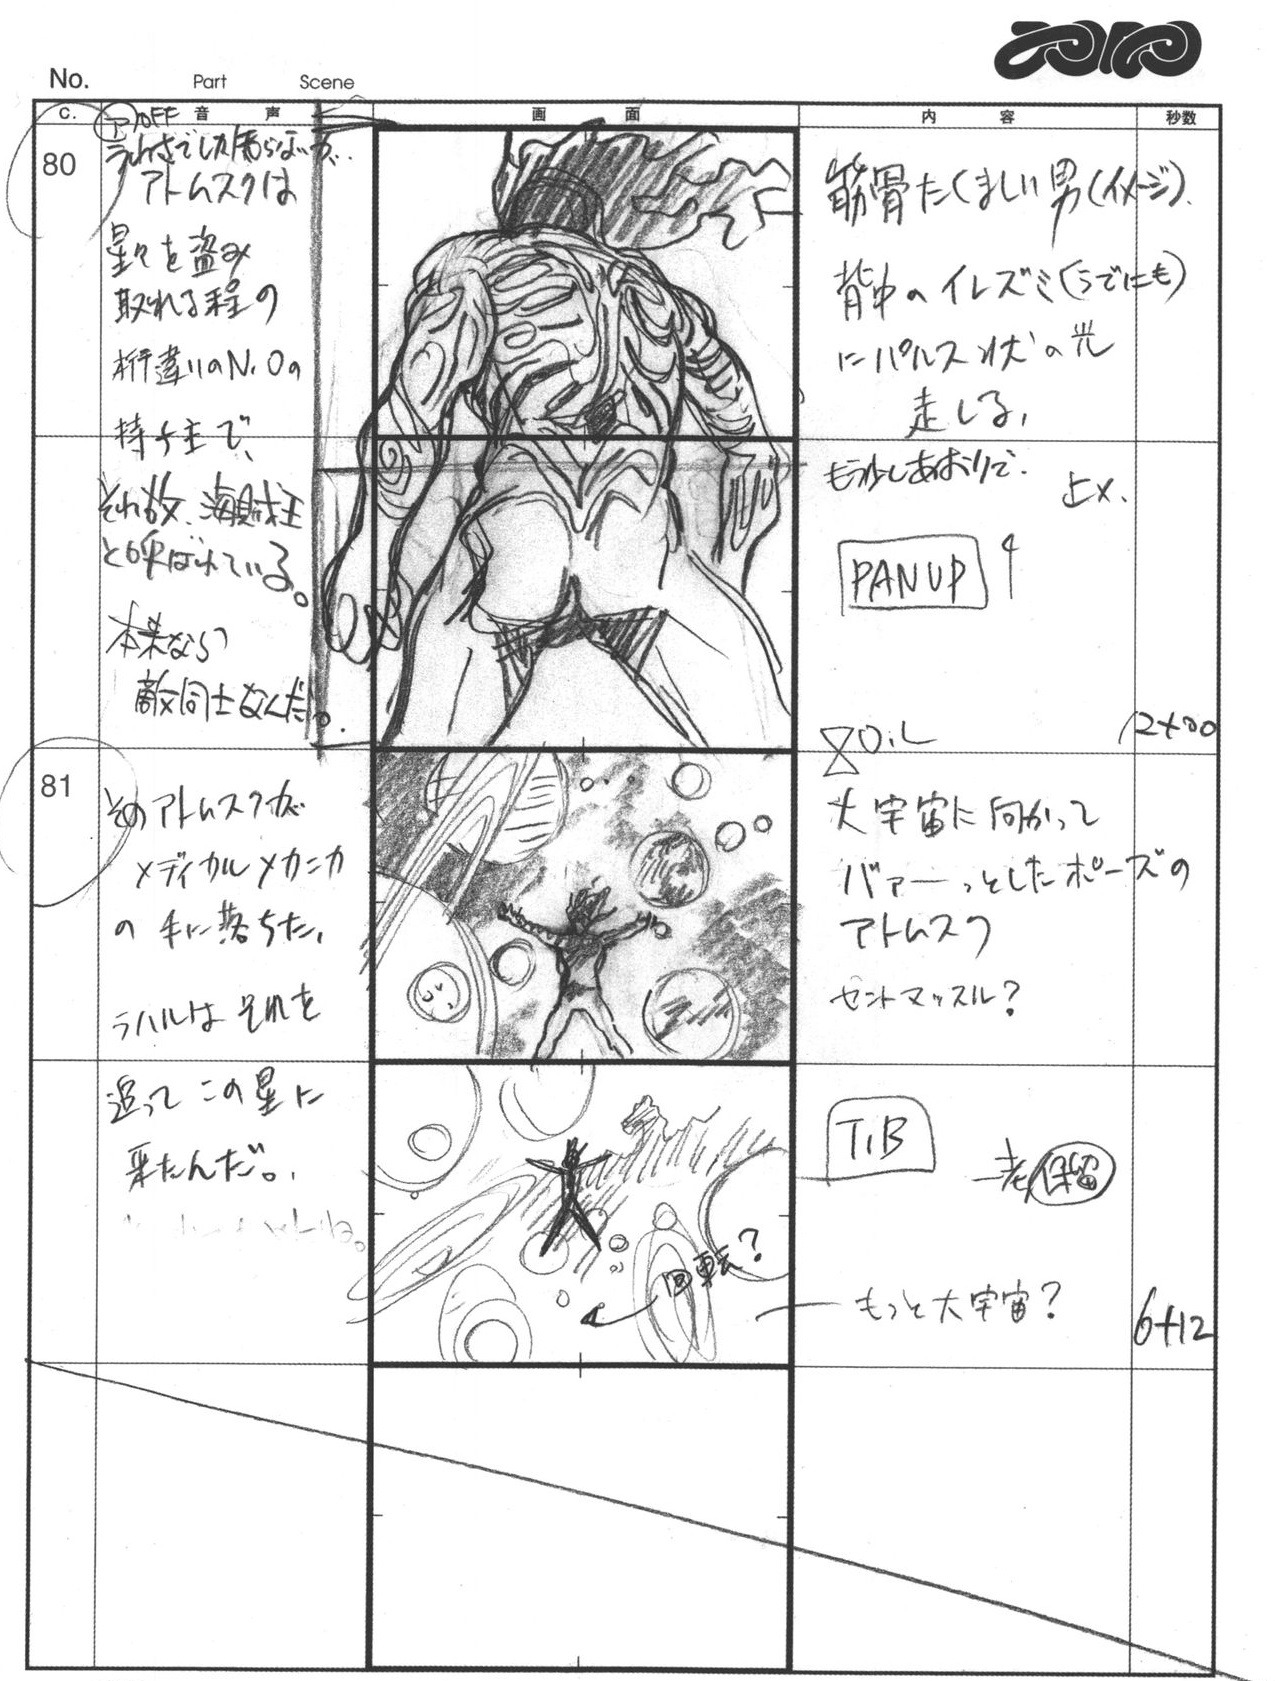 artist_unknown flcl flcl_series production_materials storyboard